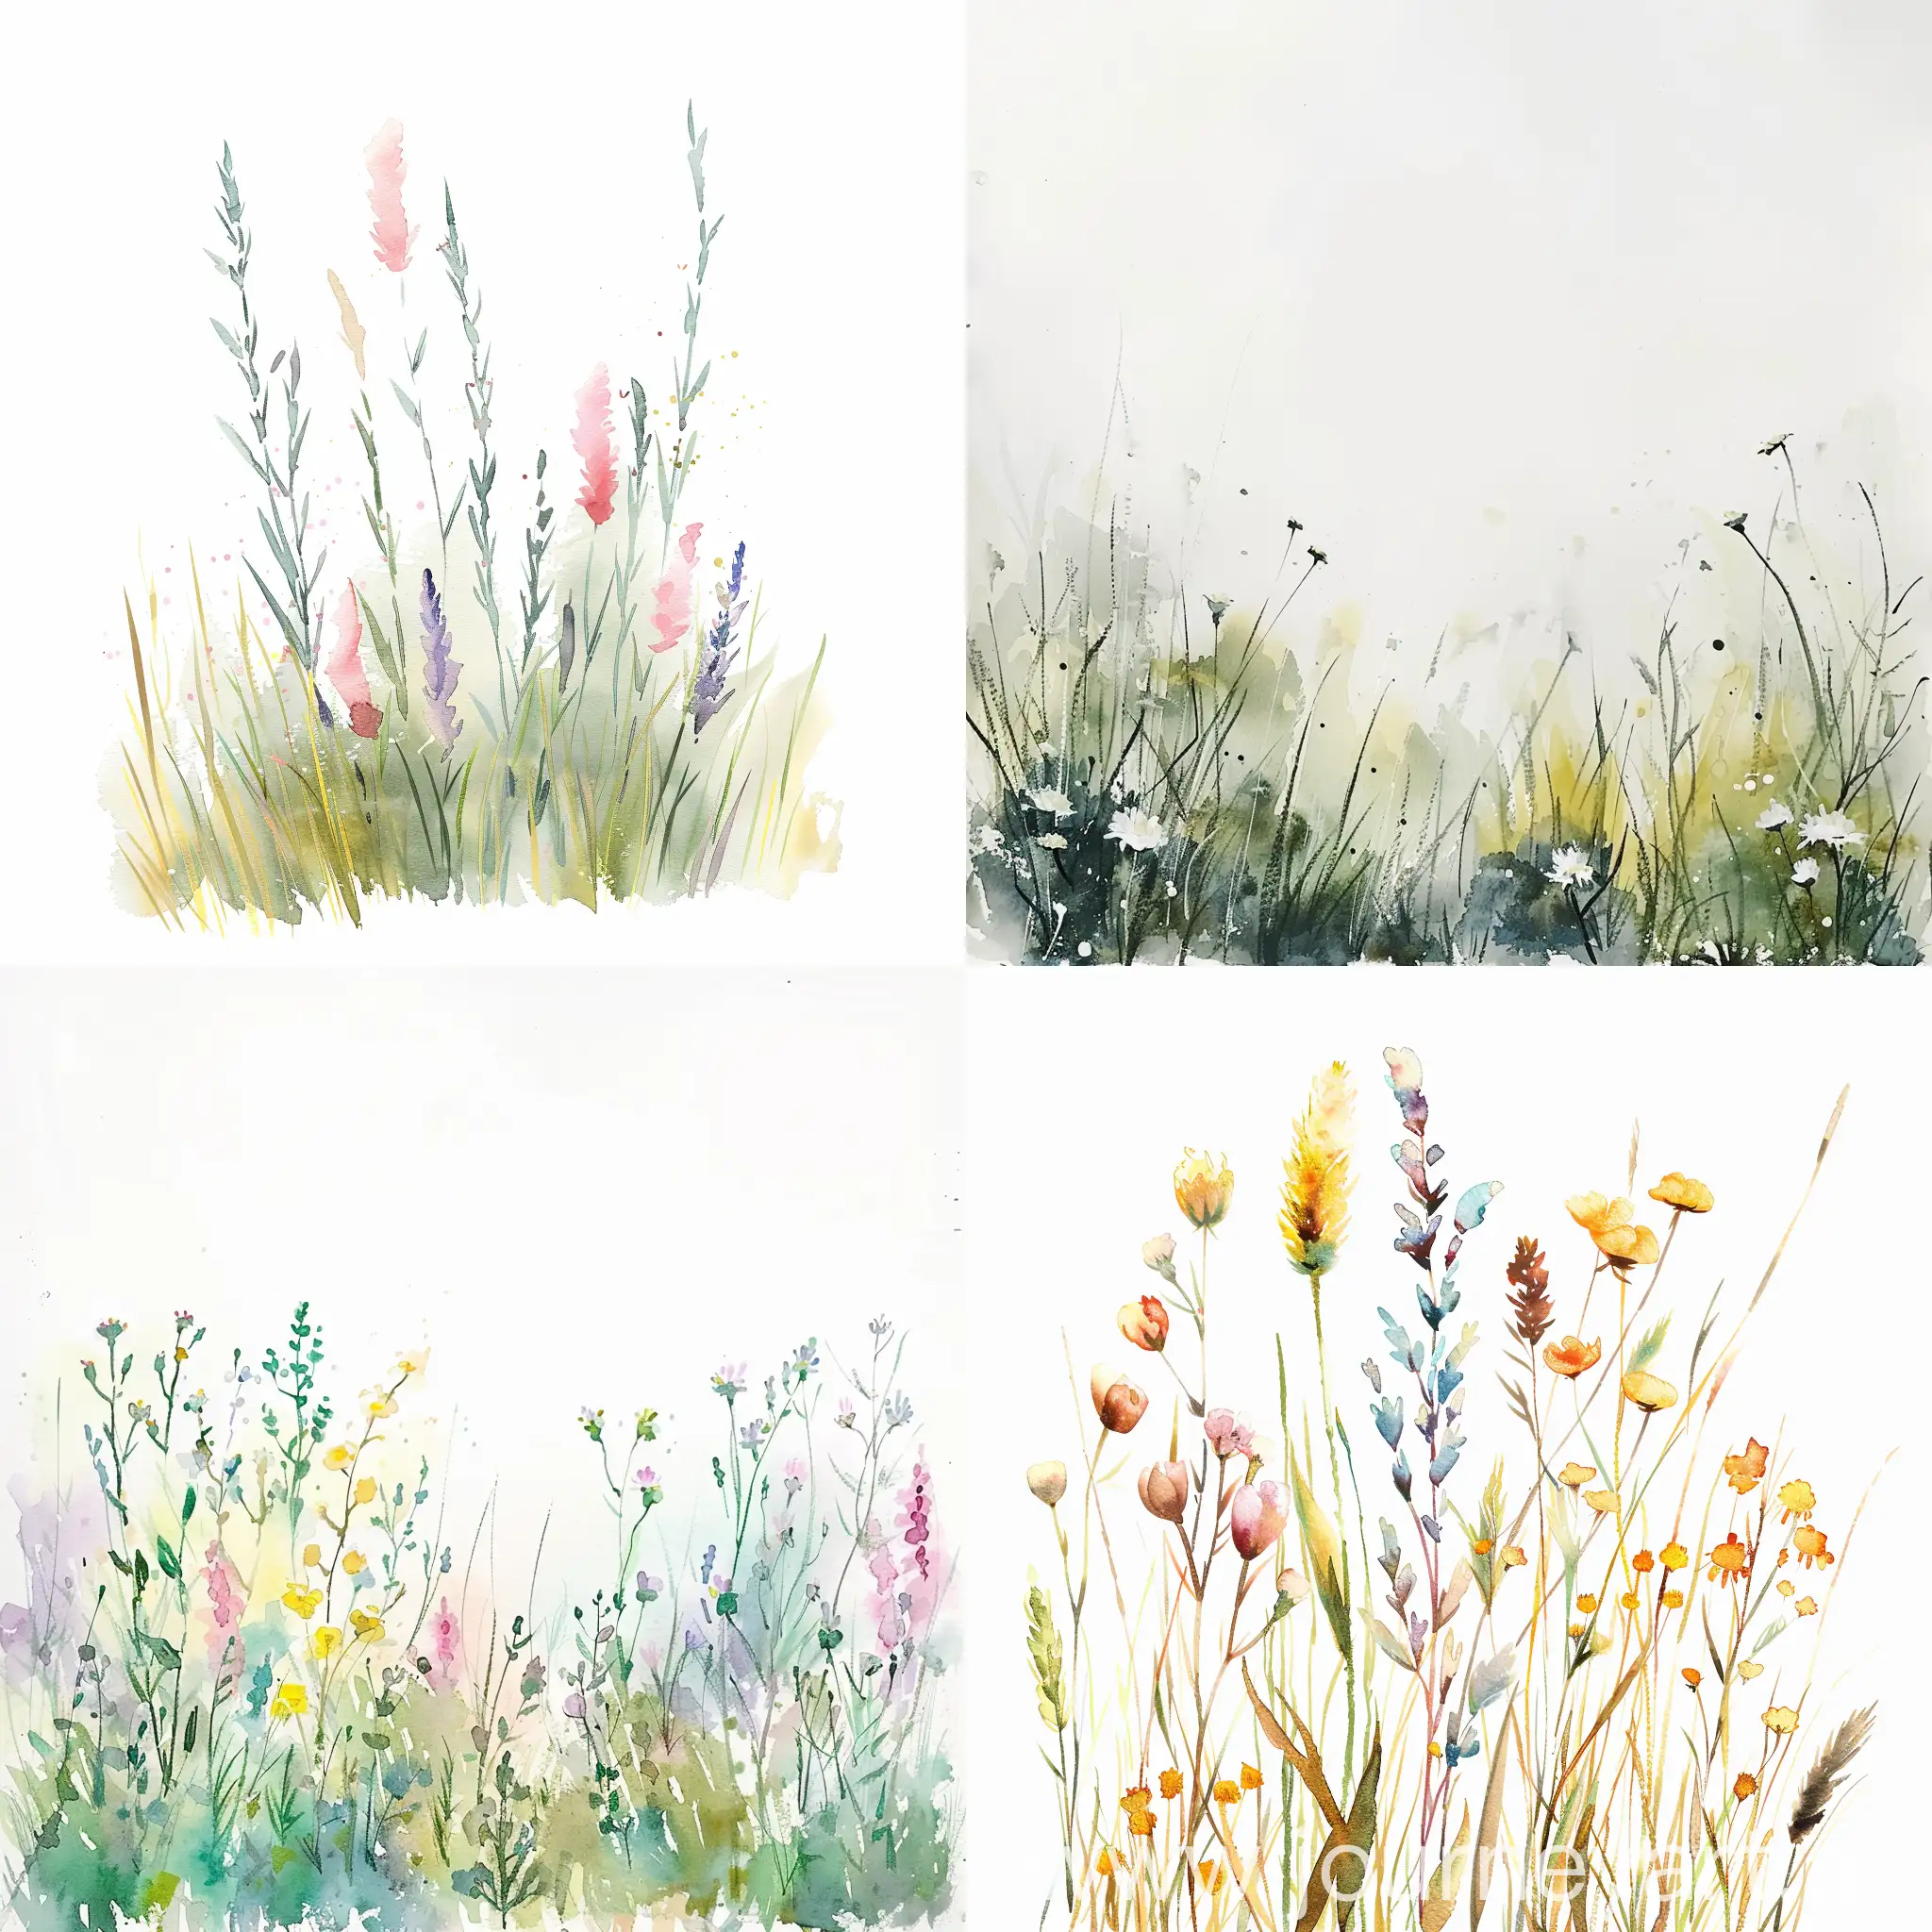 Tranquil-Watercolor-Meadow-Scene-in-Soft-Pastel-Tones